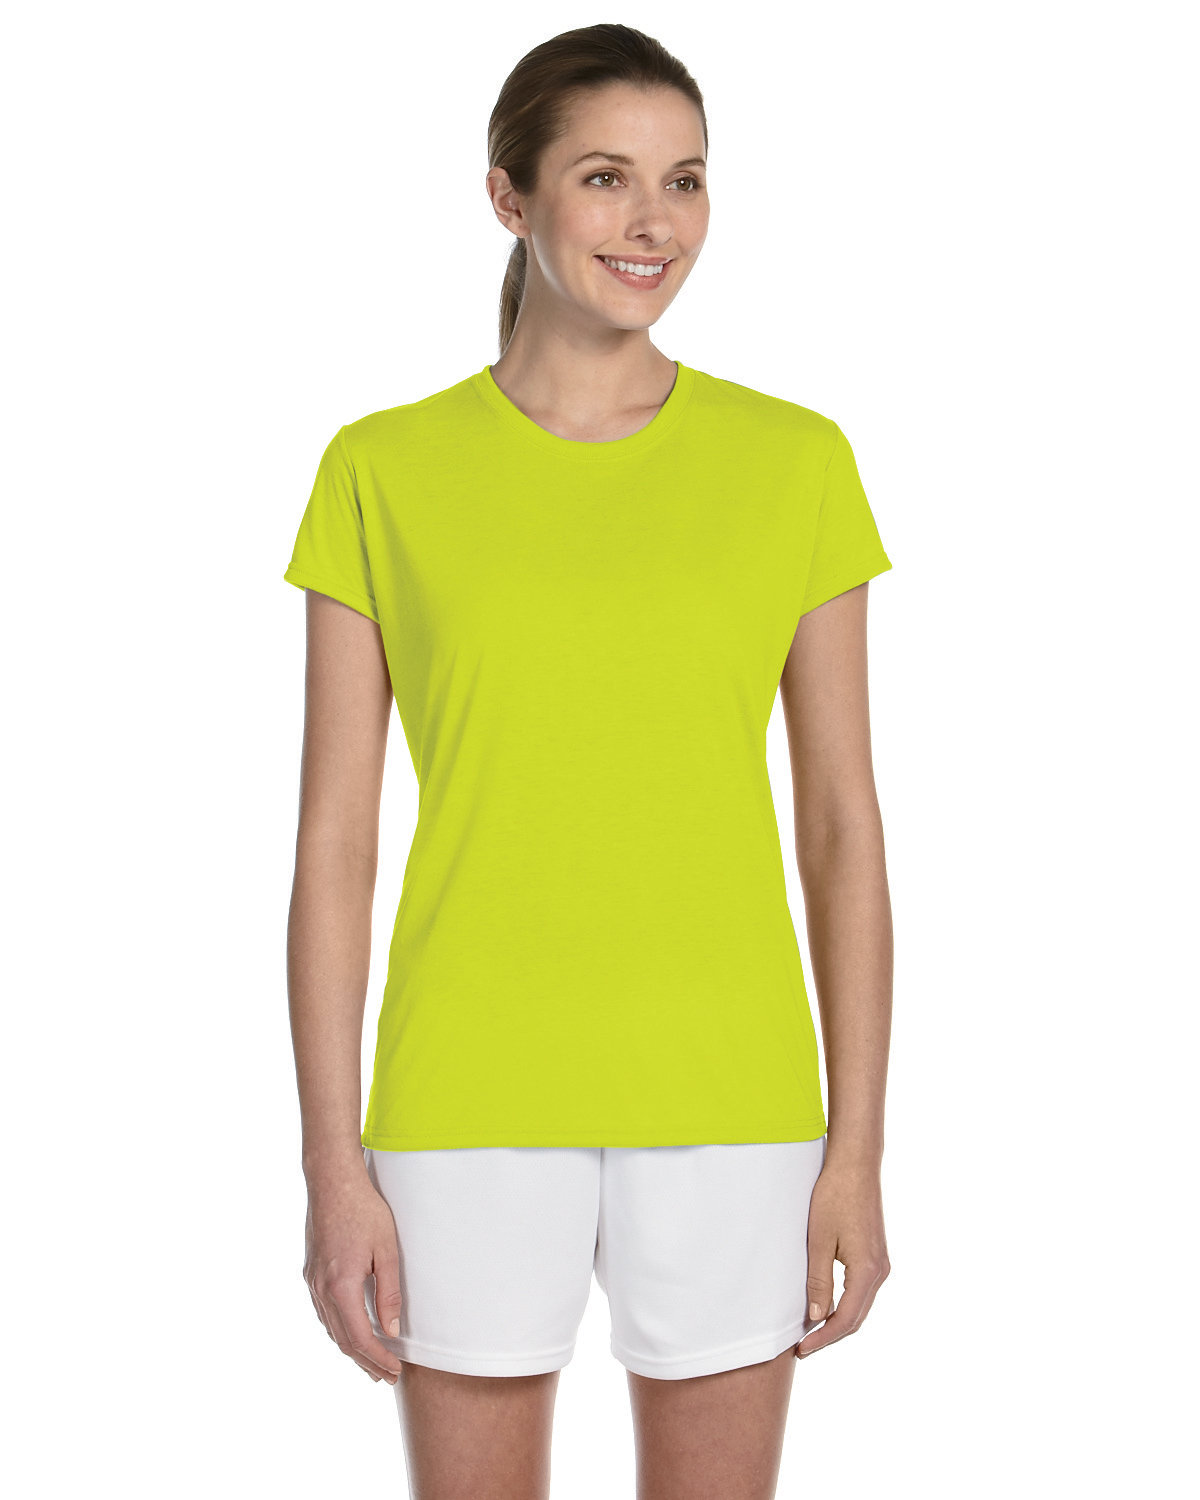 Augusta Sportswear Youth Polyester Diamond Mesh V-Neck Jersey with Contrast Side Inserts - 9531